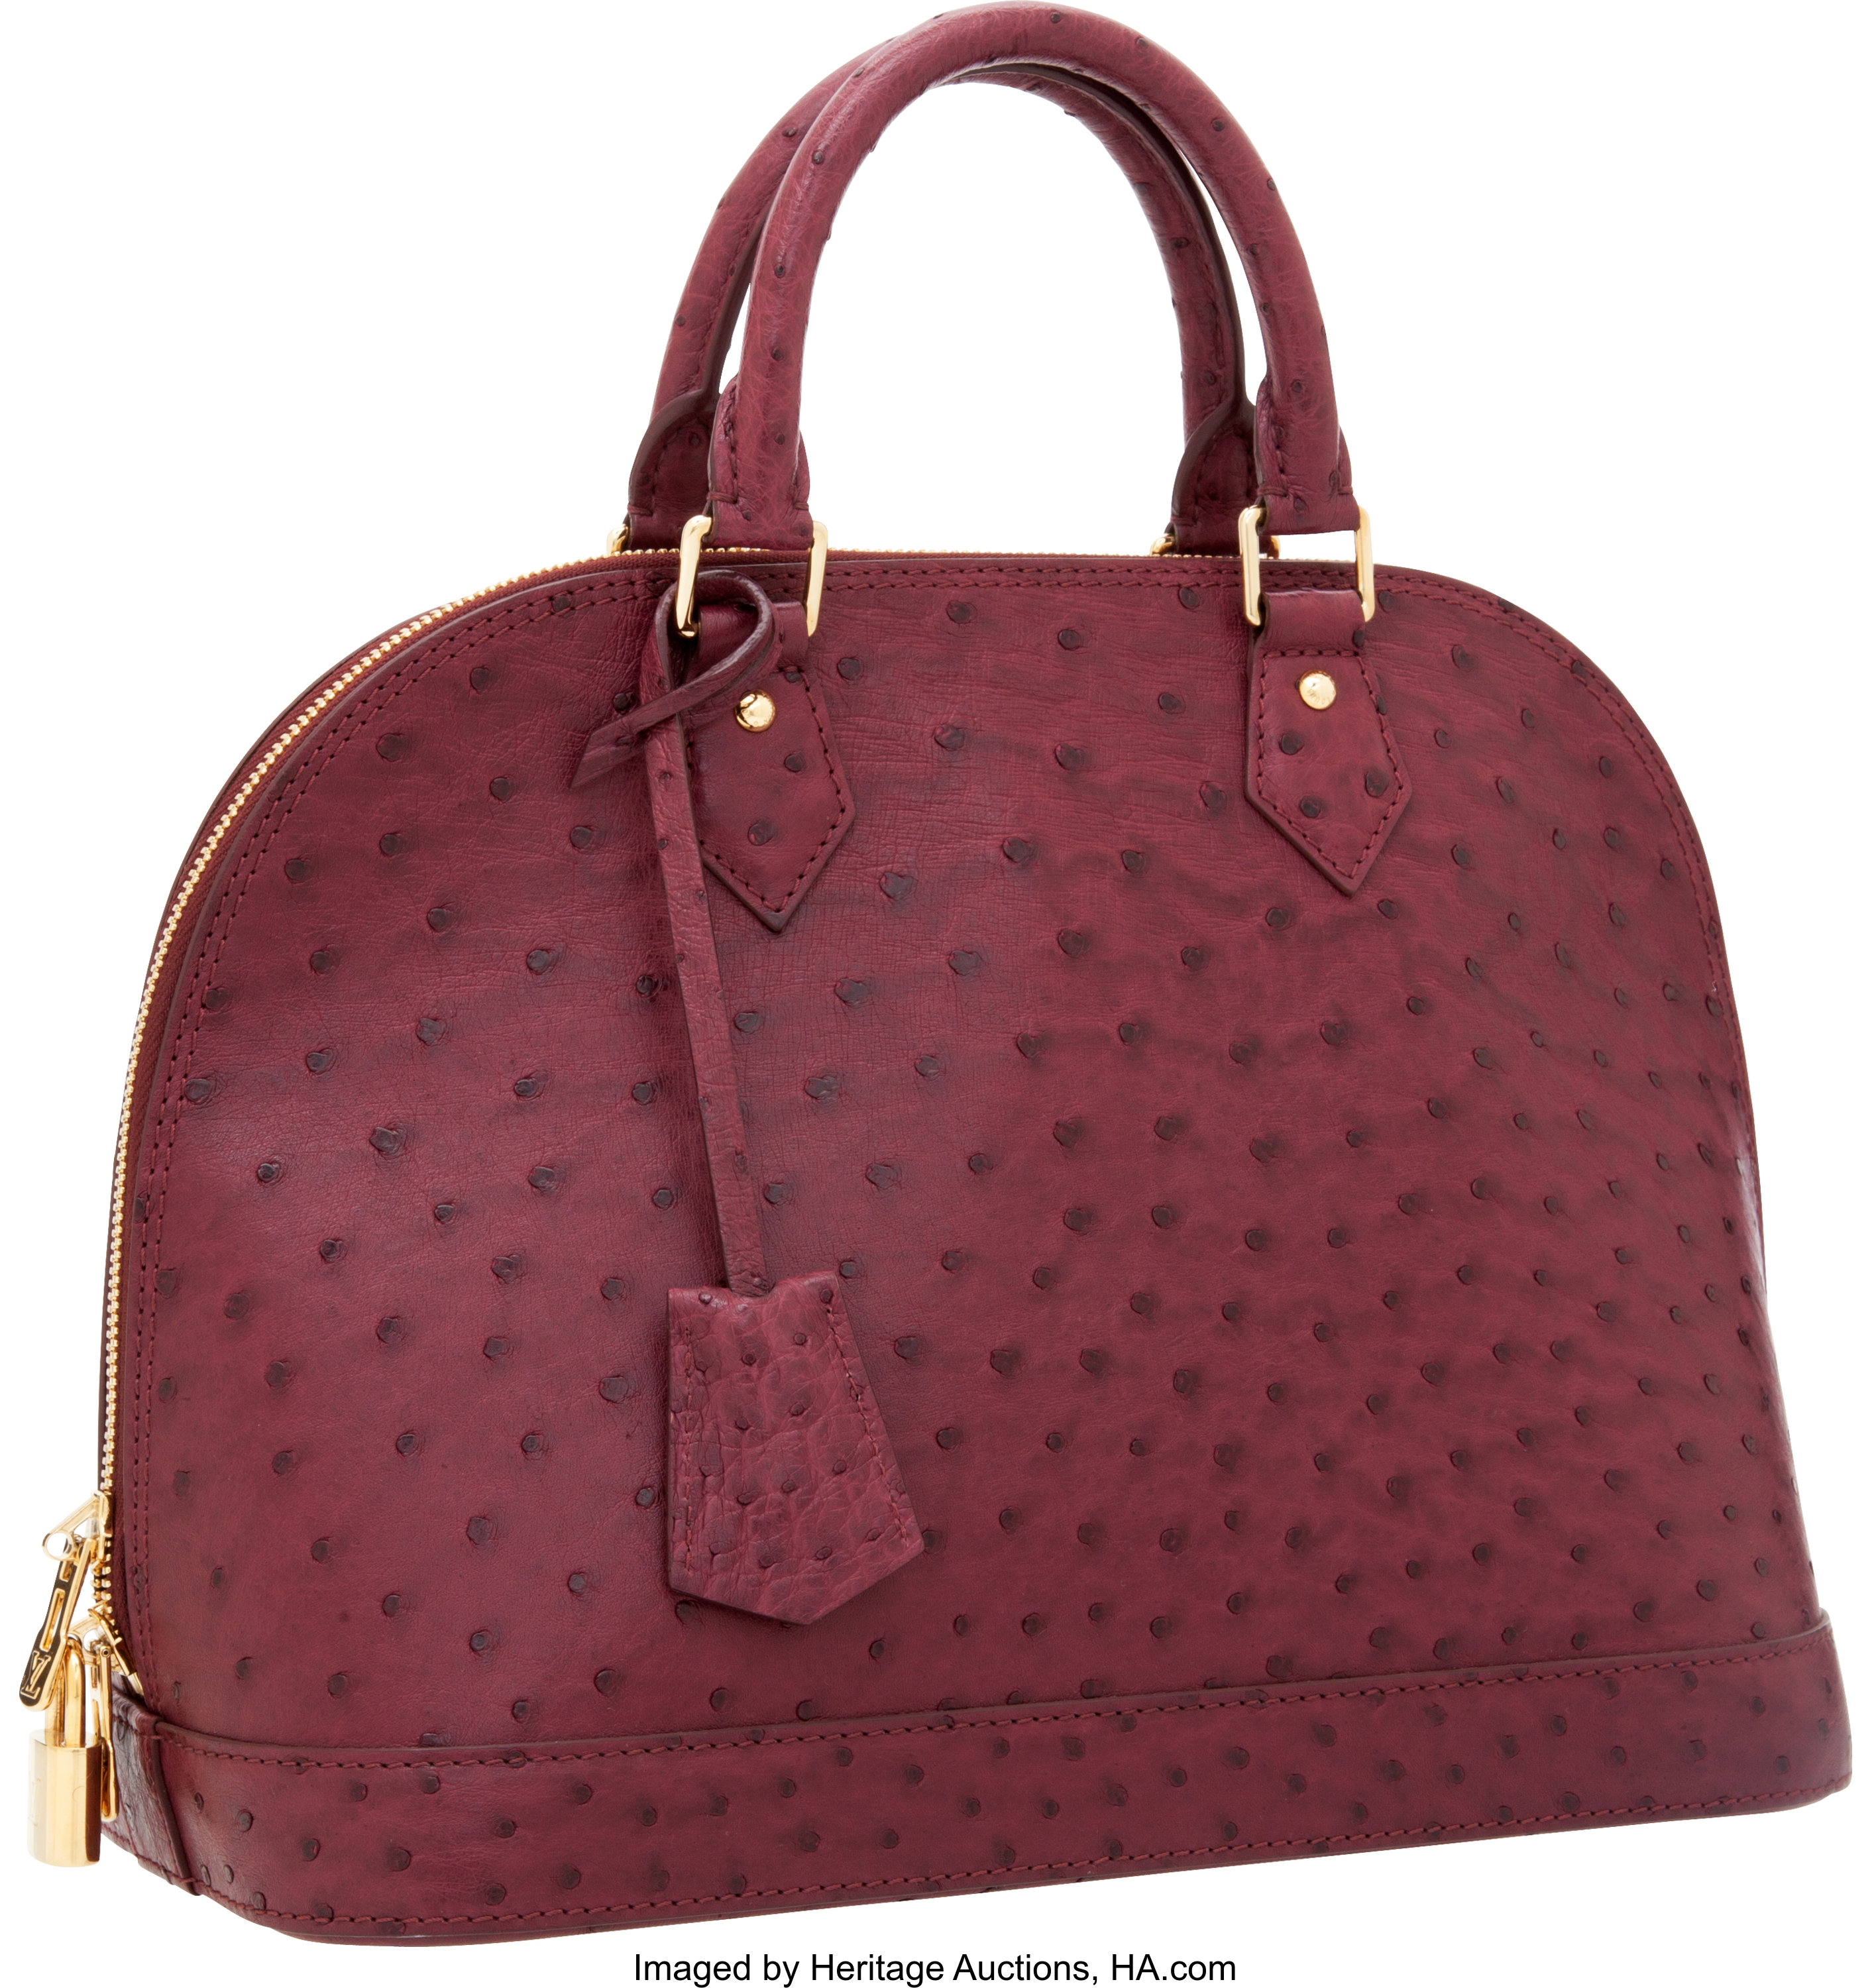 Louis Vuitton Prune Ostrich Alma PM Bag with Gold Hardware